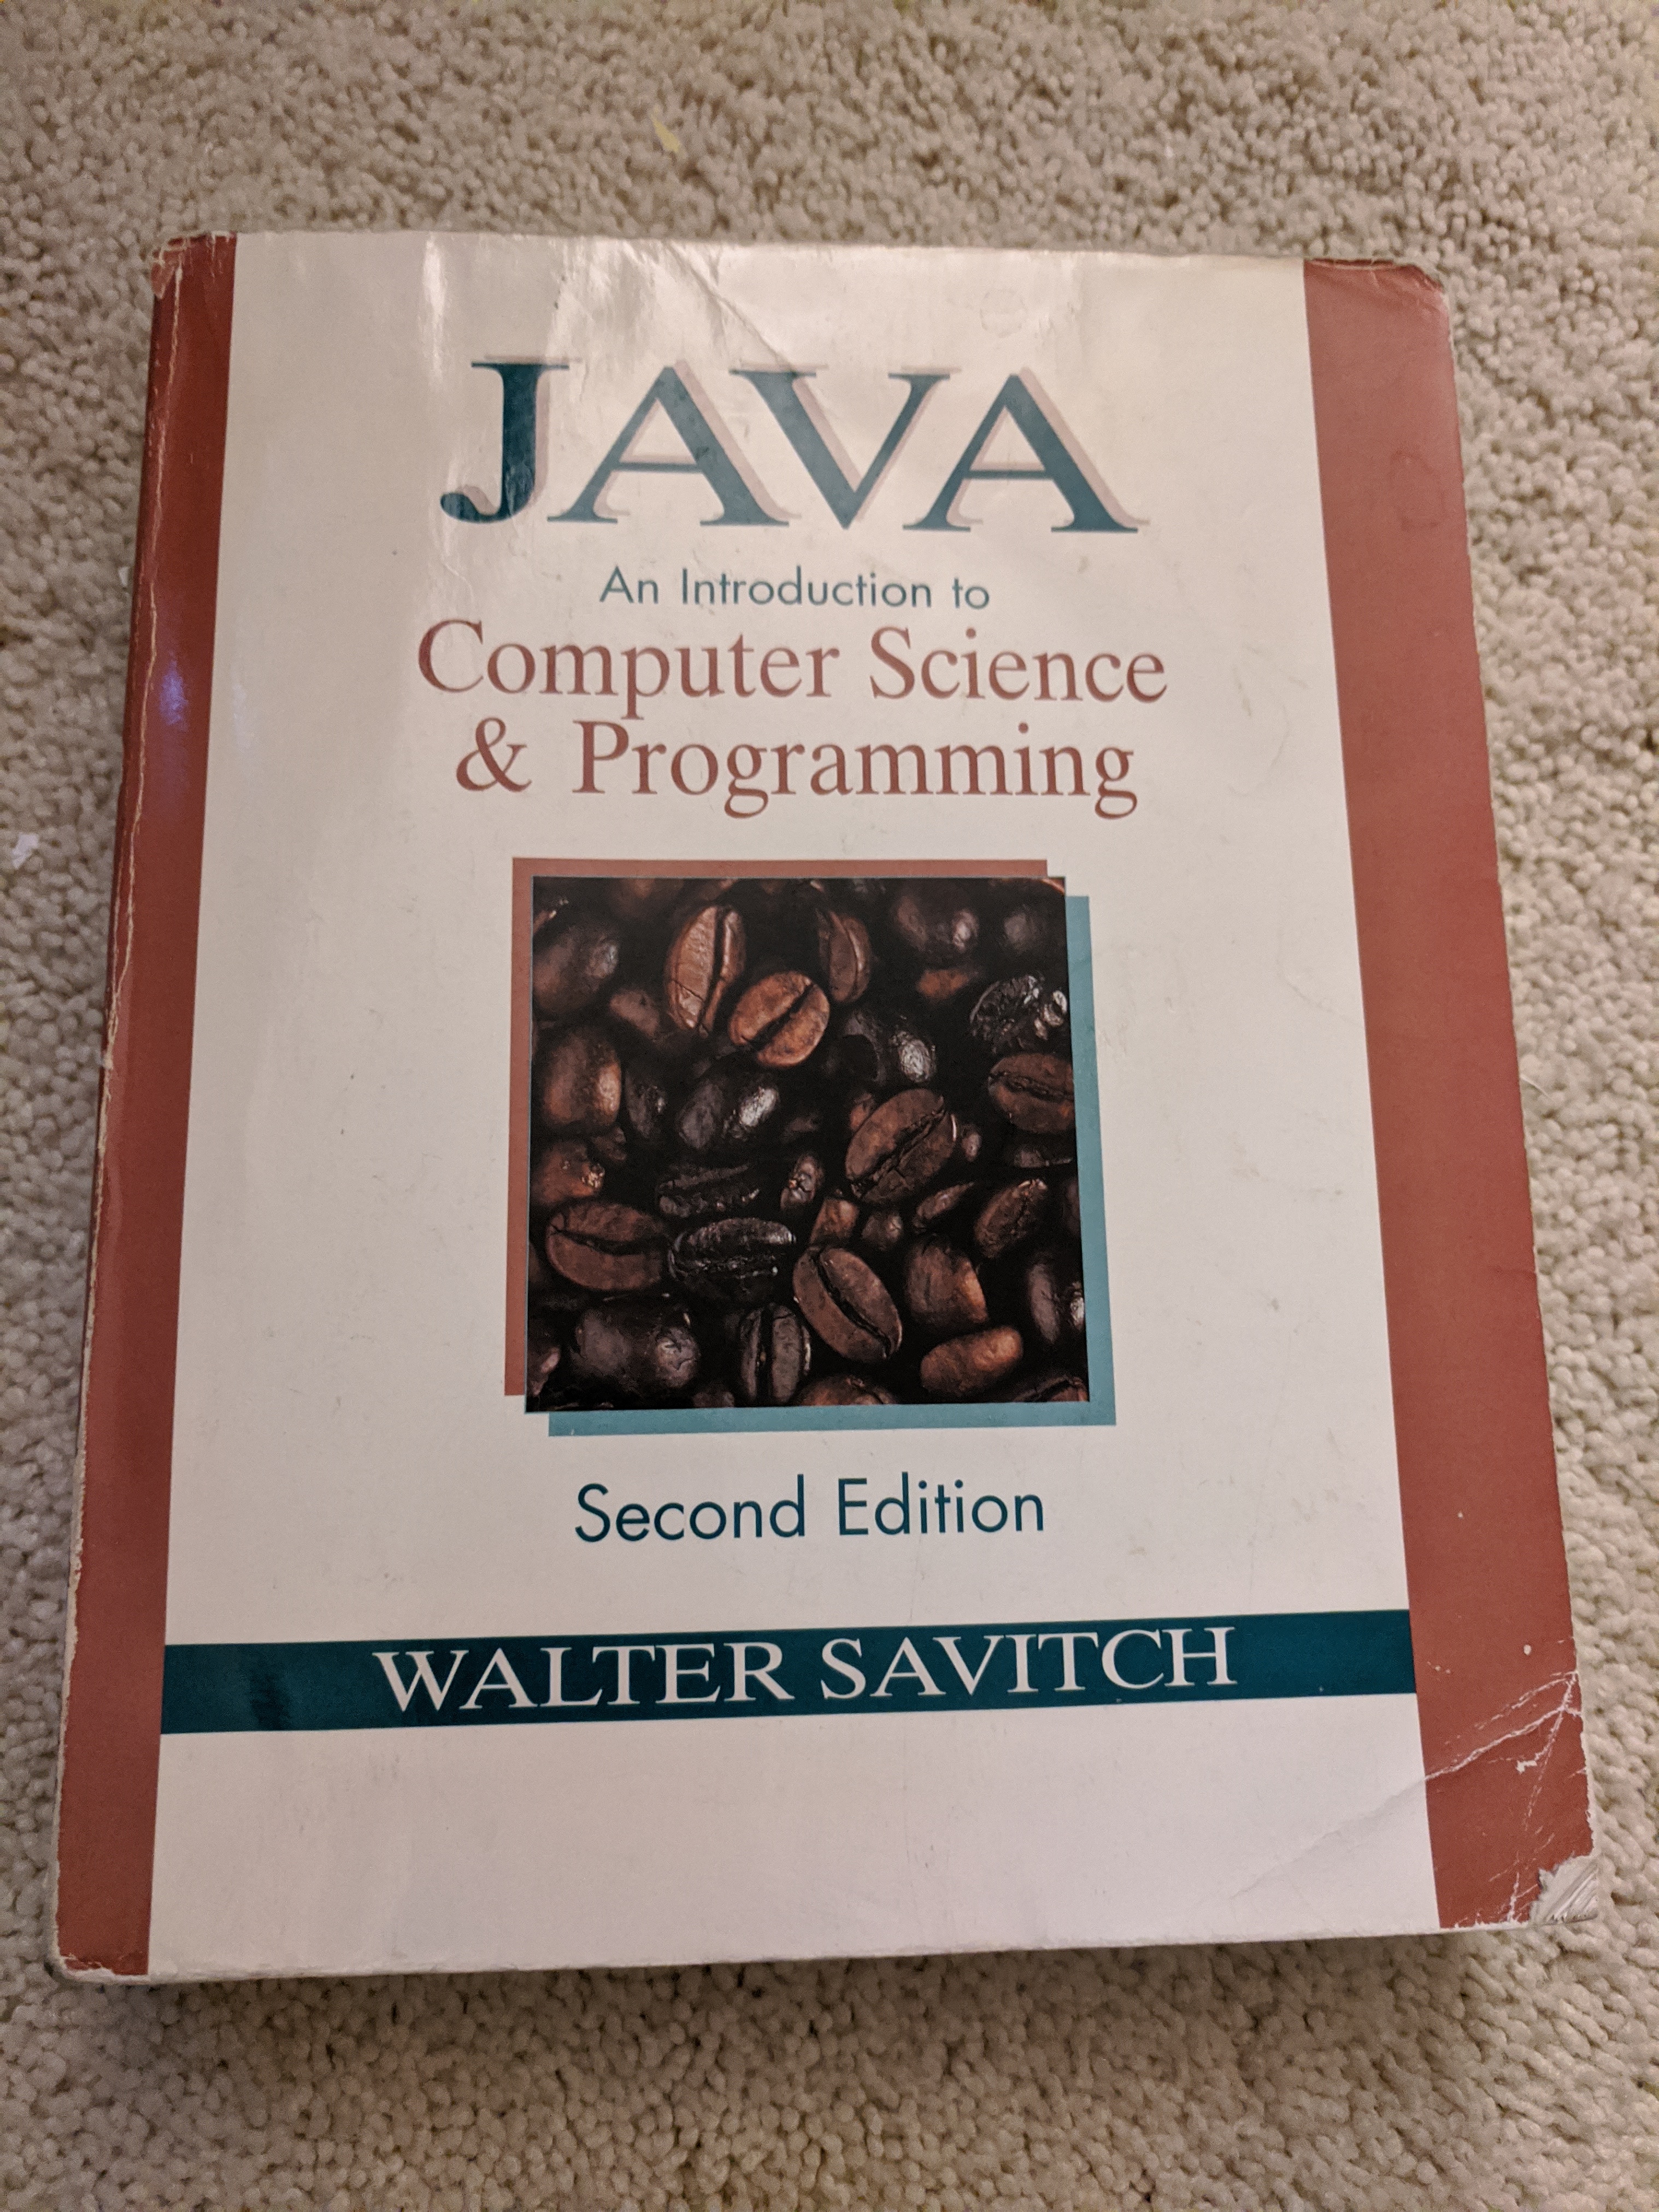 Walter Savitch second edition of Java: An Introduction to Computer Science and Programming